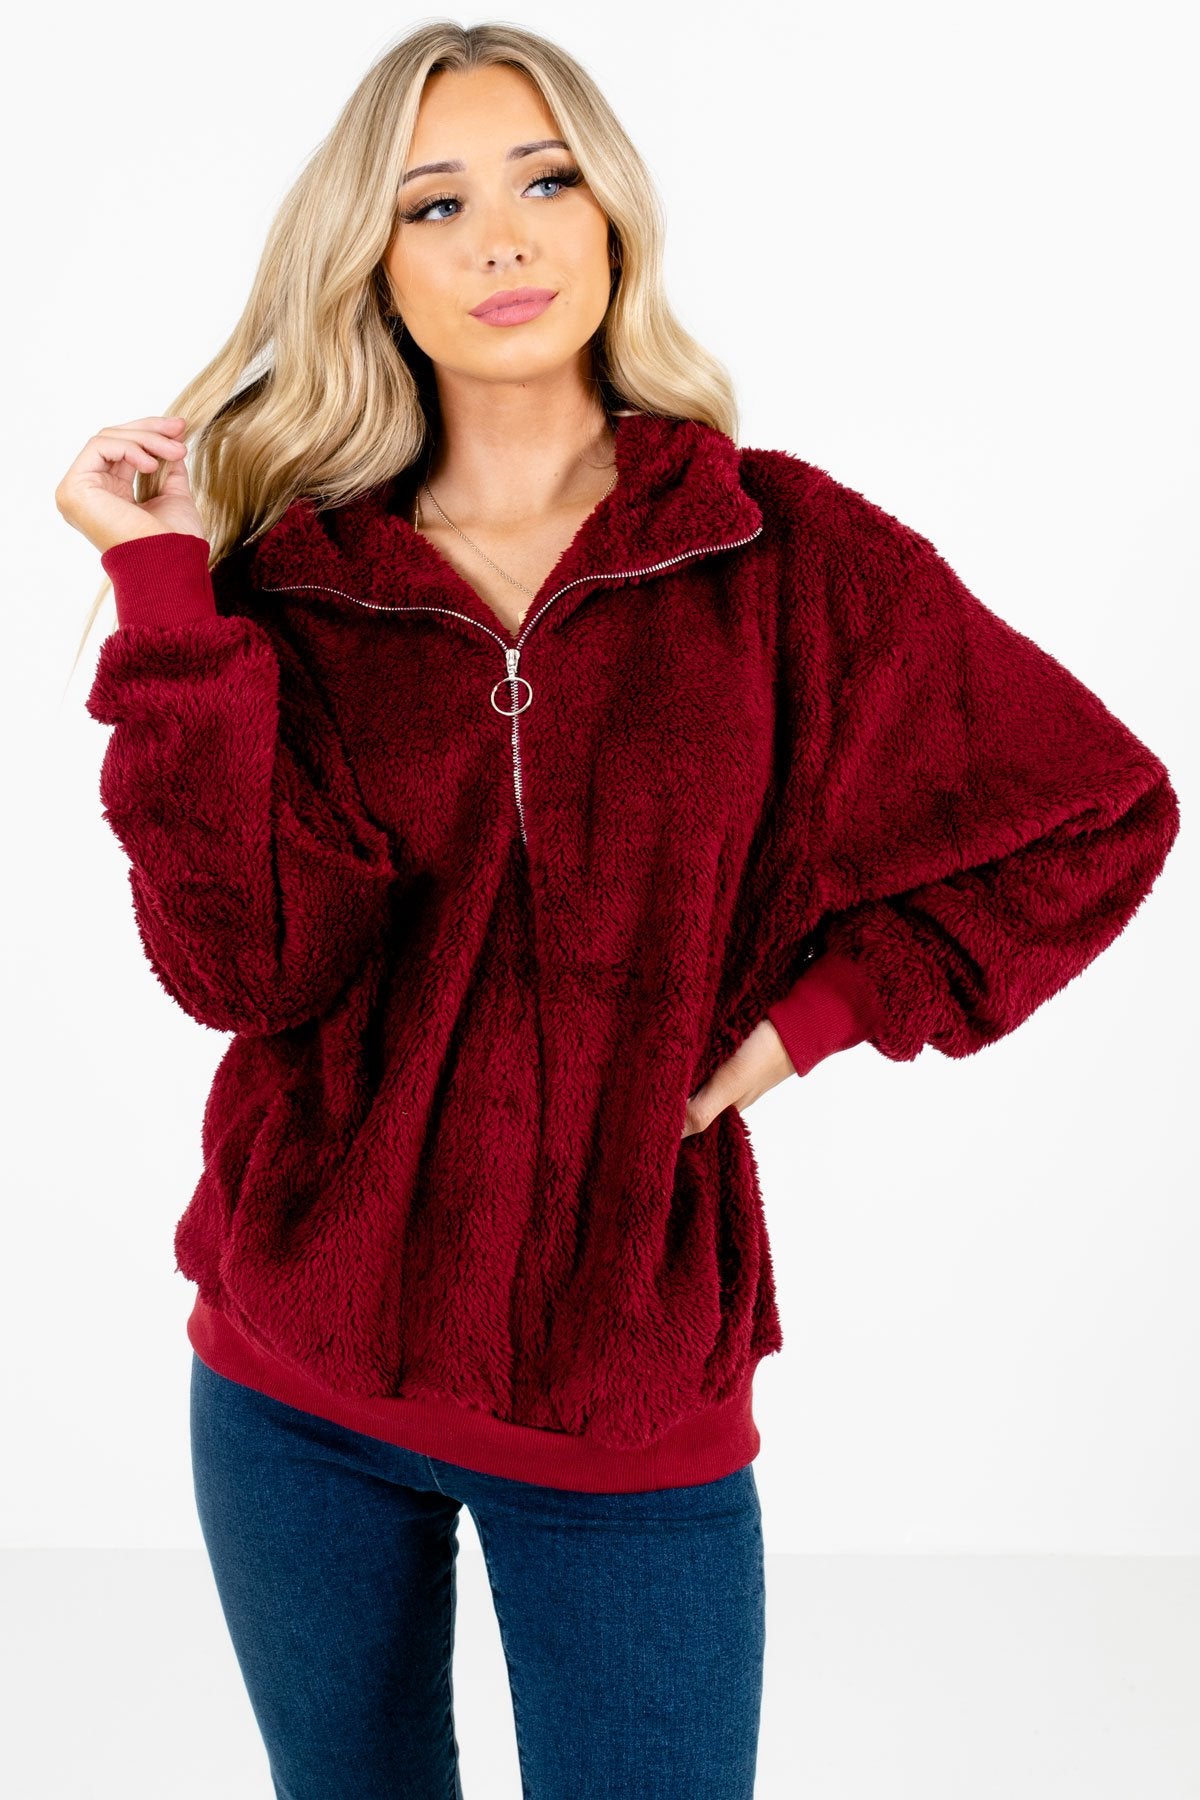 Burgundy High-Quality Fuzzy Material Boutique Pullovers for Women